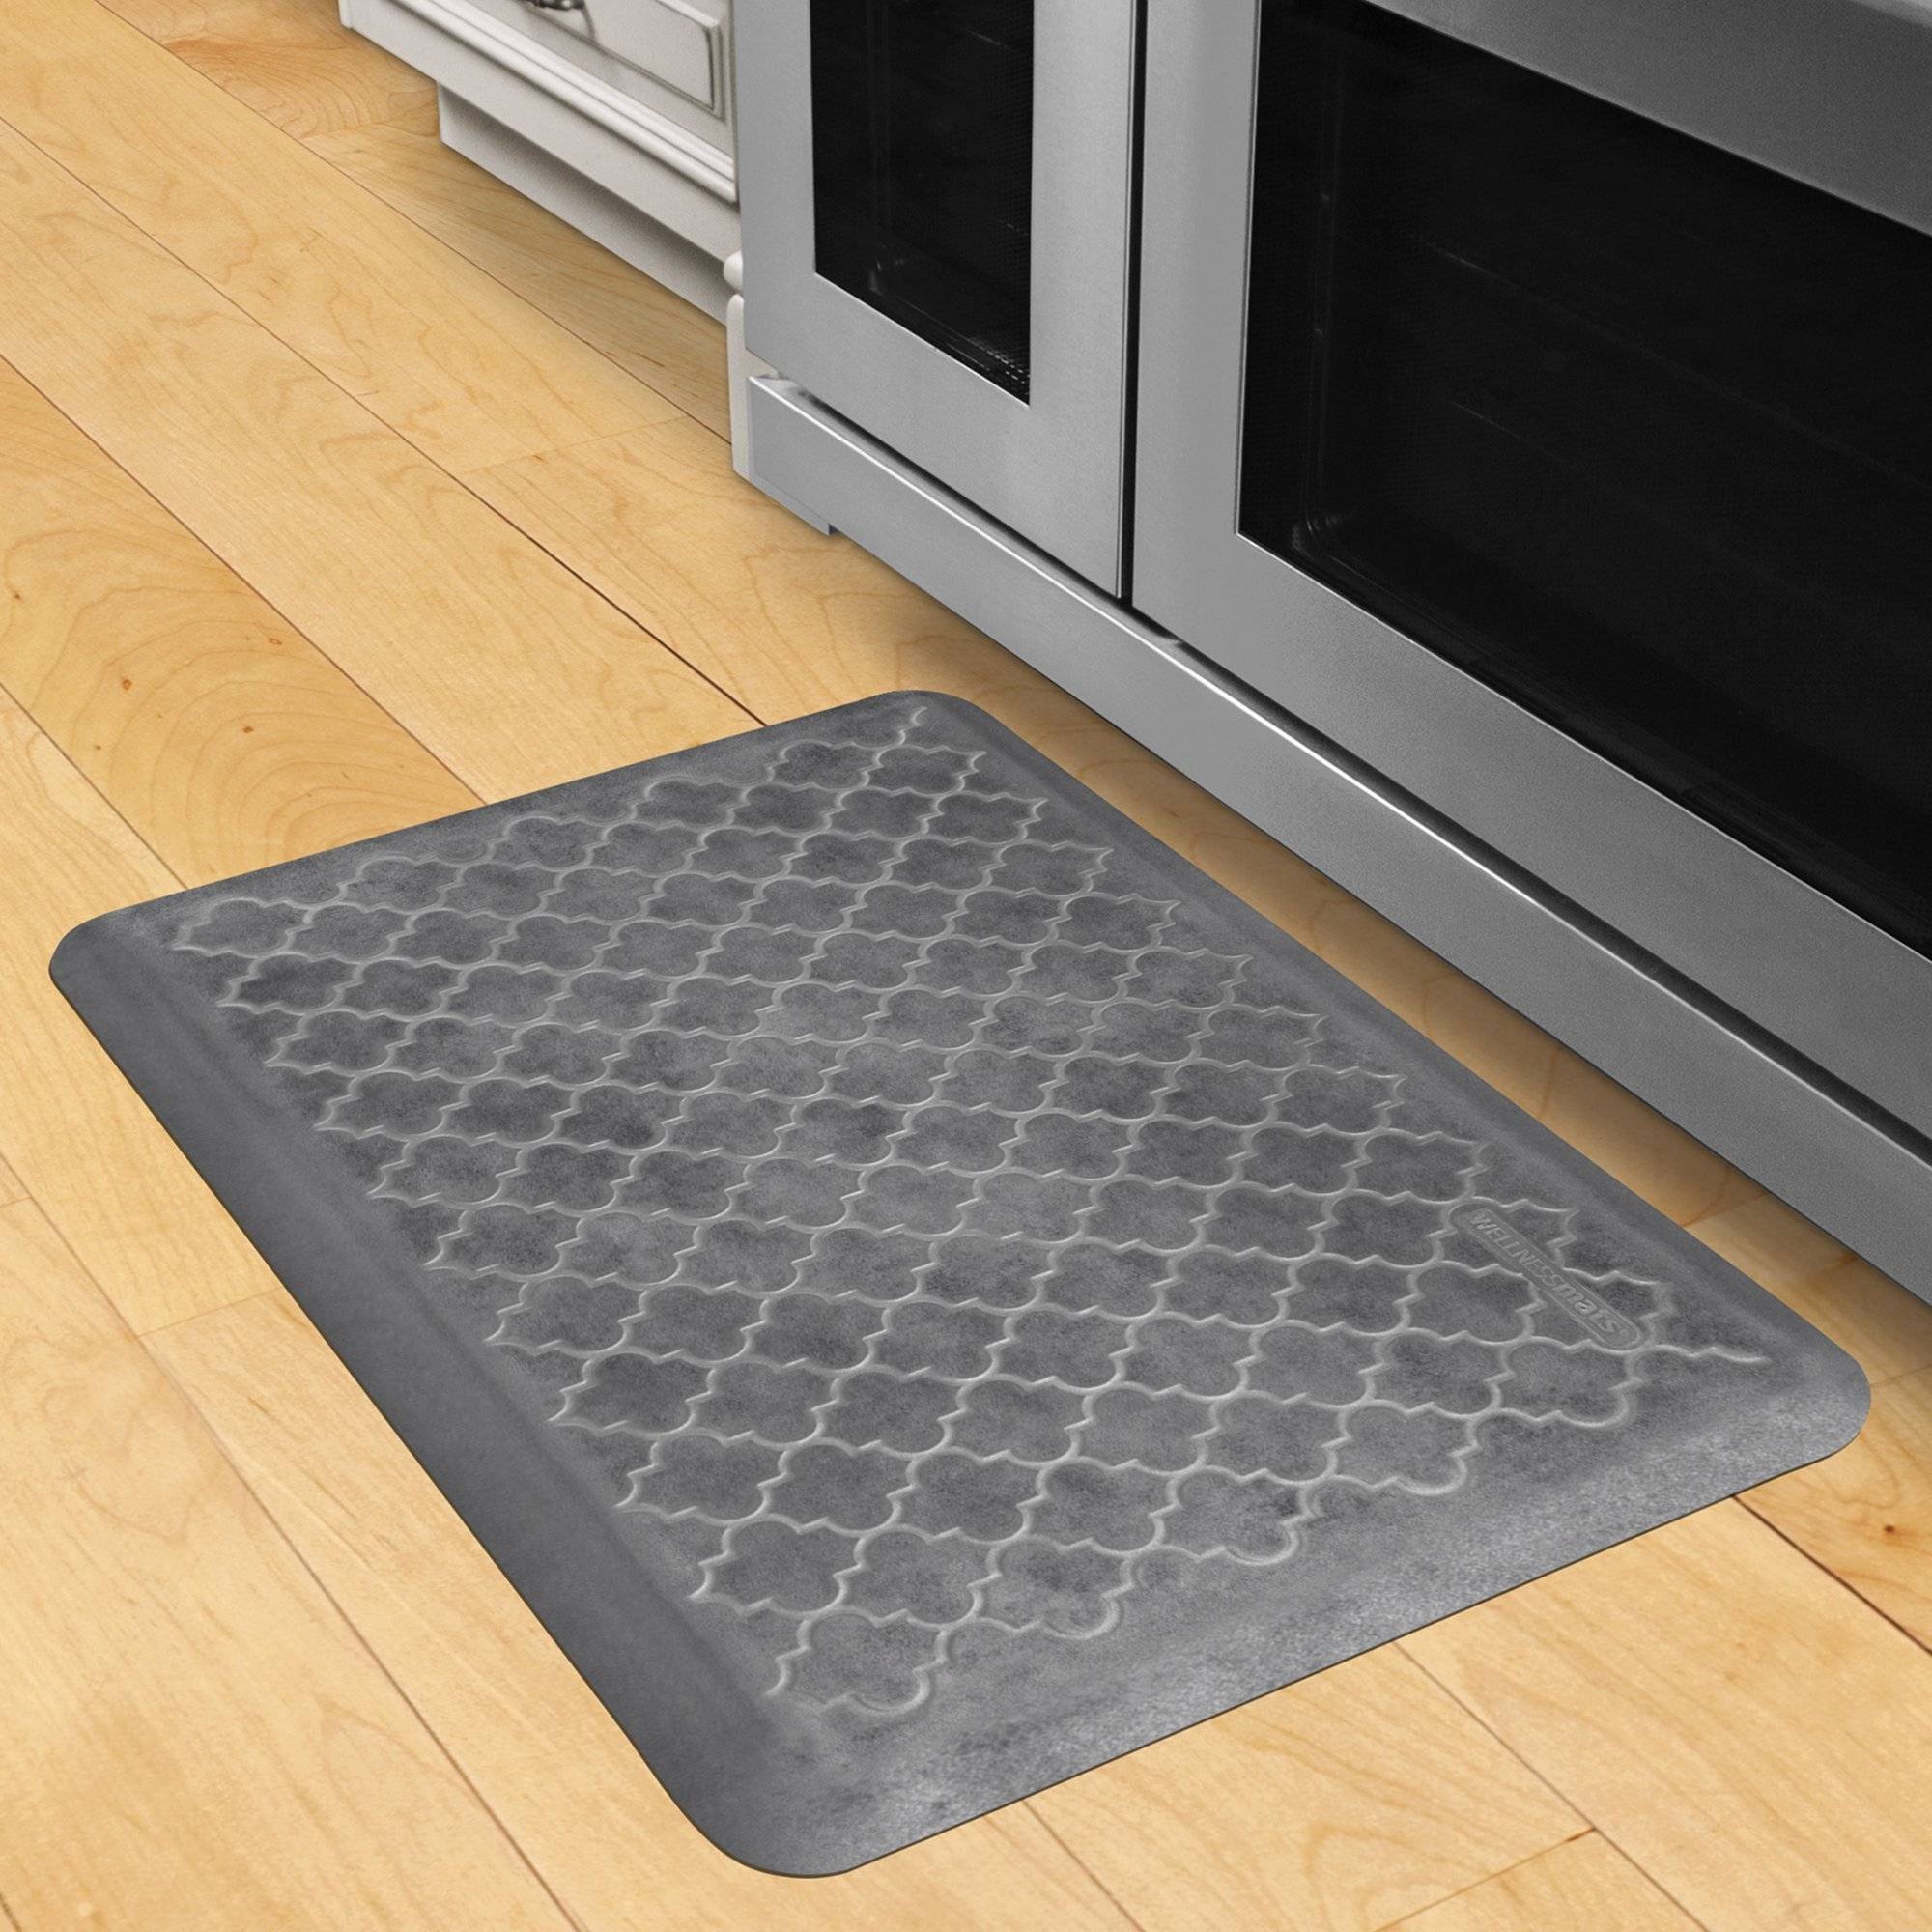 Wellnessmats Trellis Estates Shades of Silver ET32WMRBNGRY,Slate A kitchen rug that relieves pressure and discomfort. A non-toxic ergo mat.